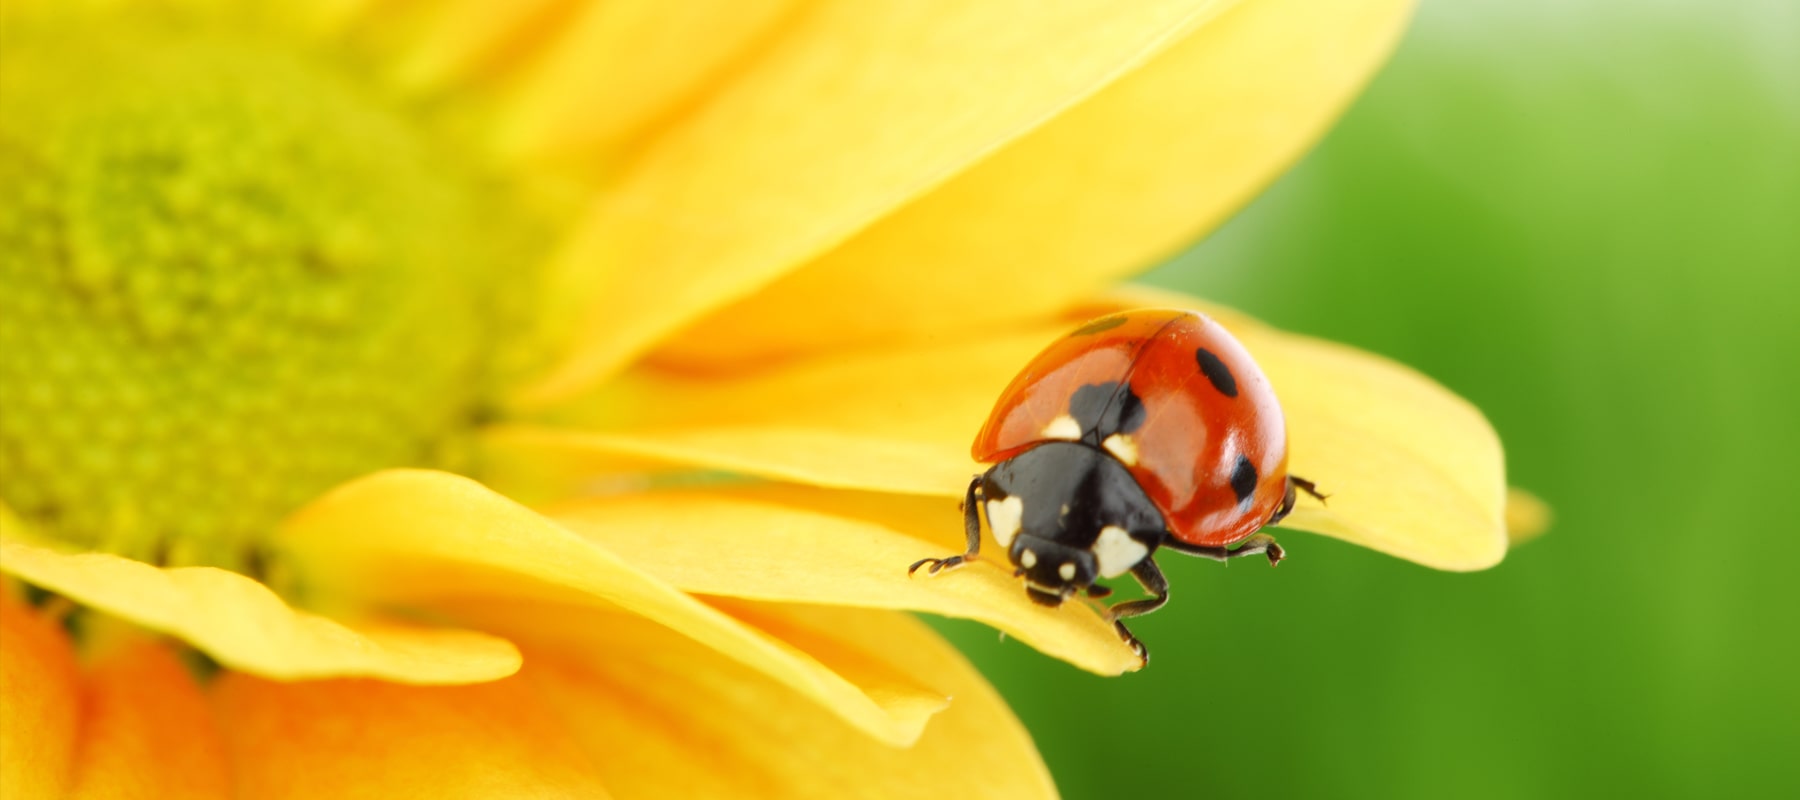 Beneficial insects